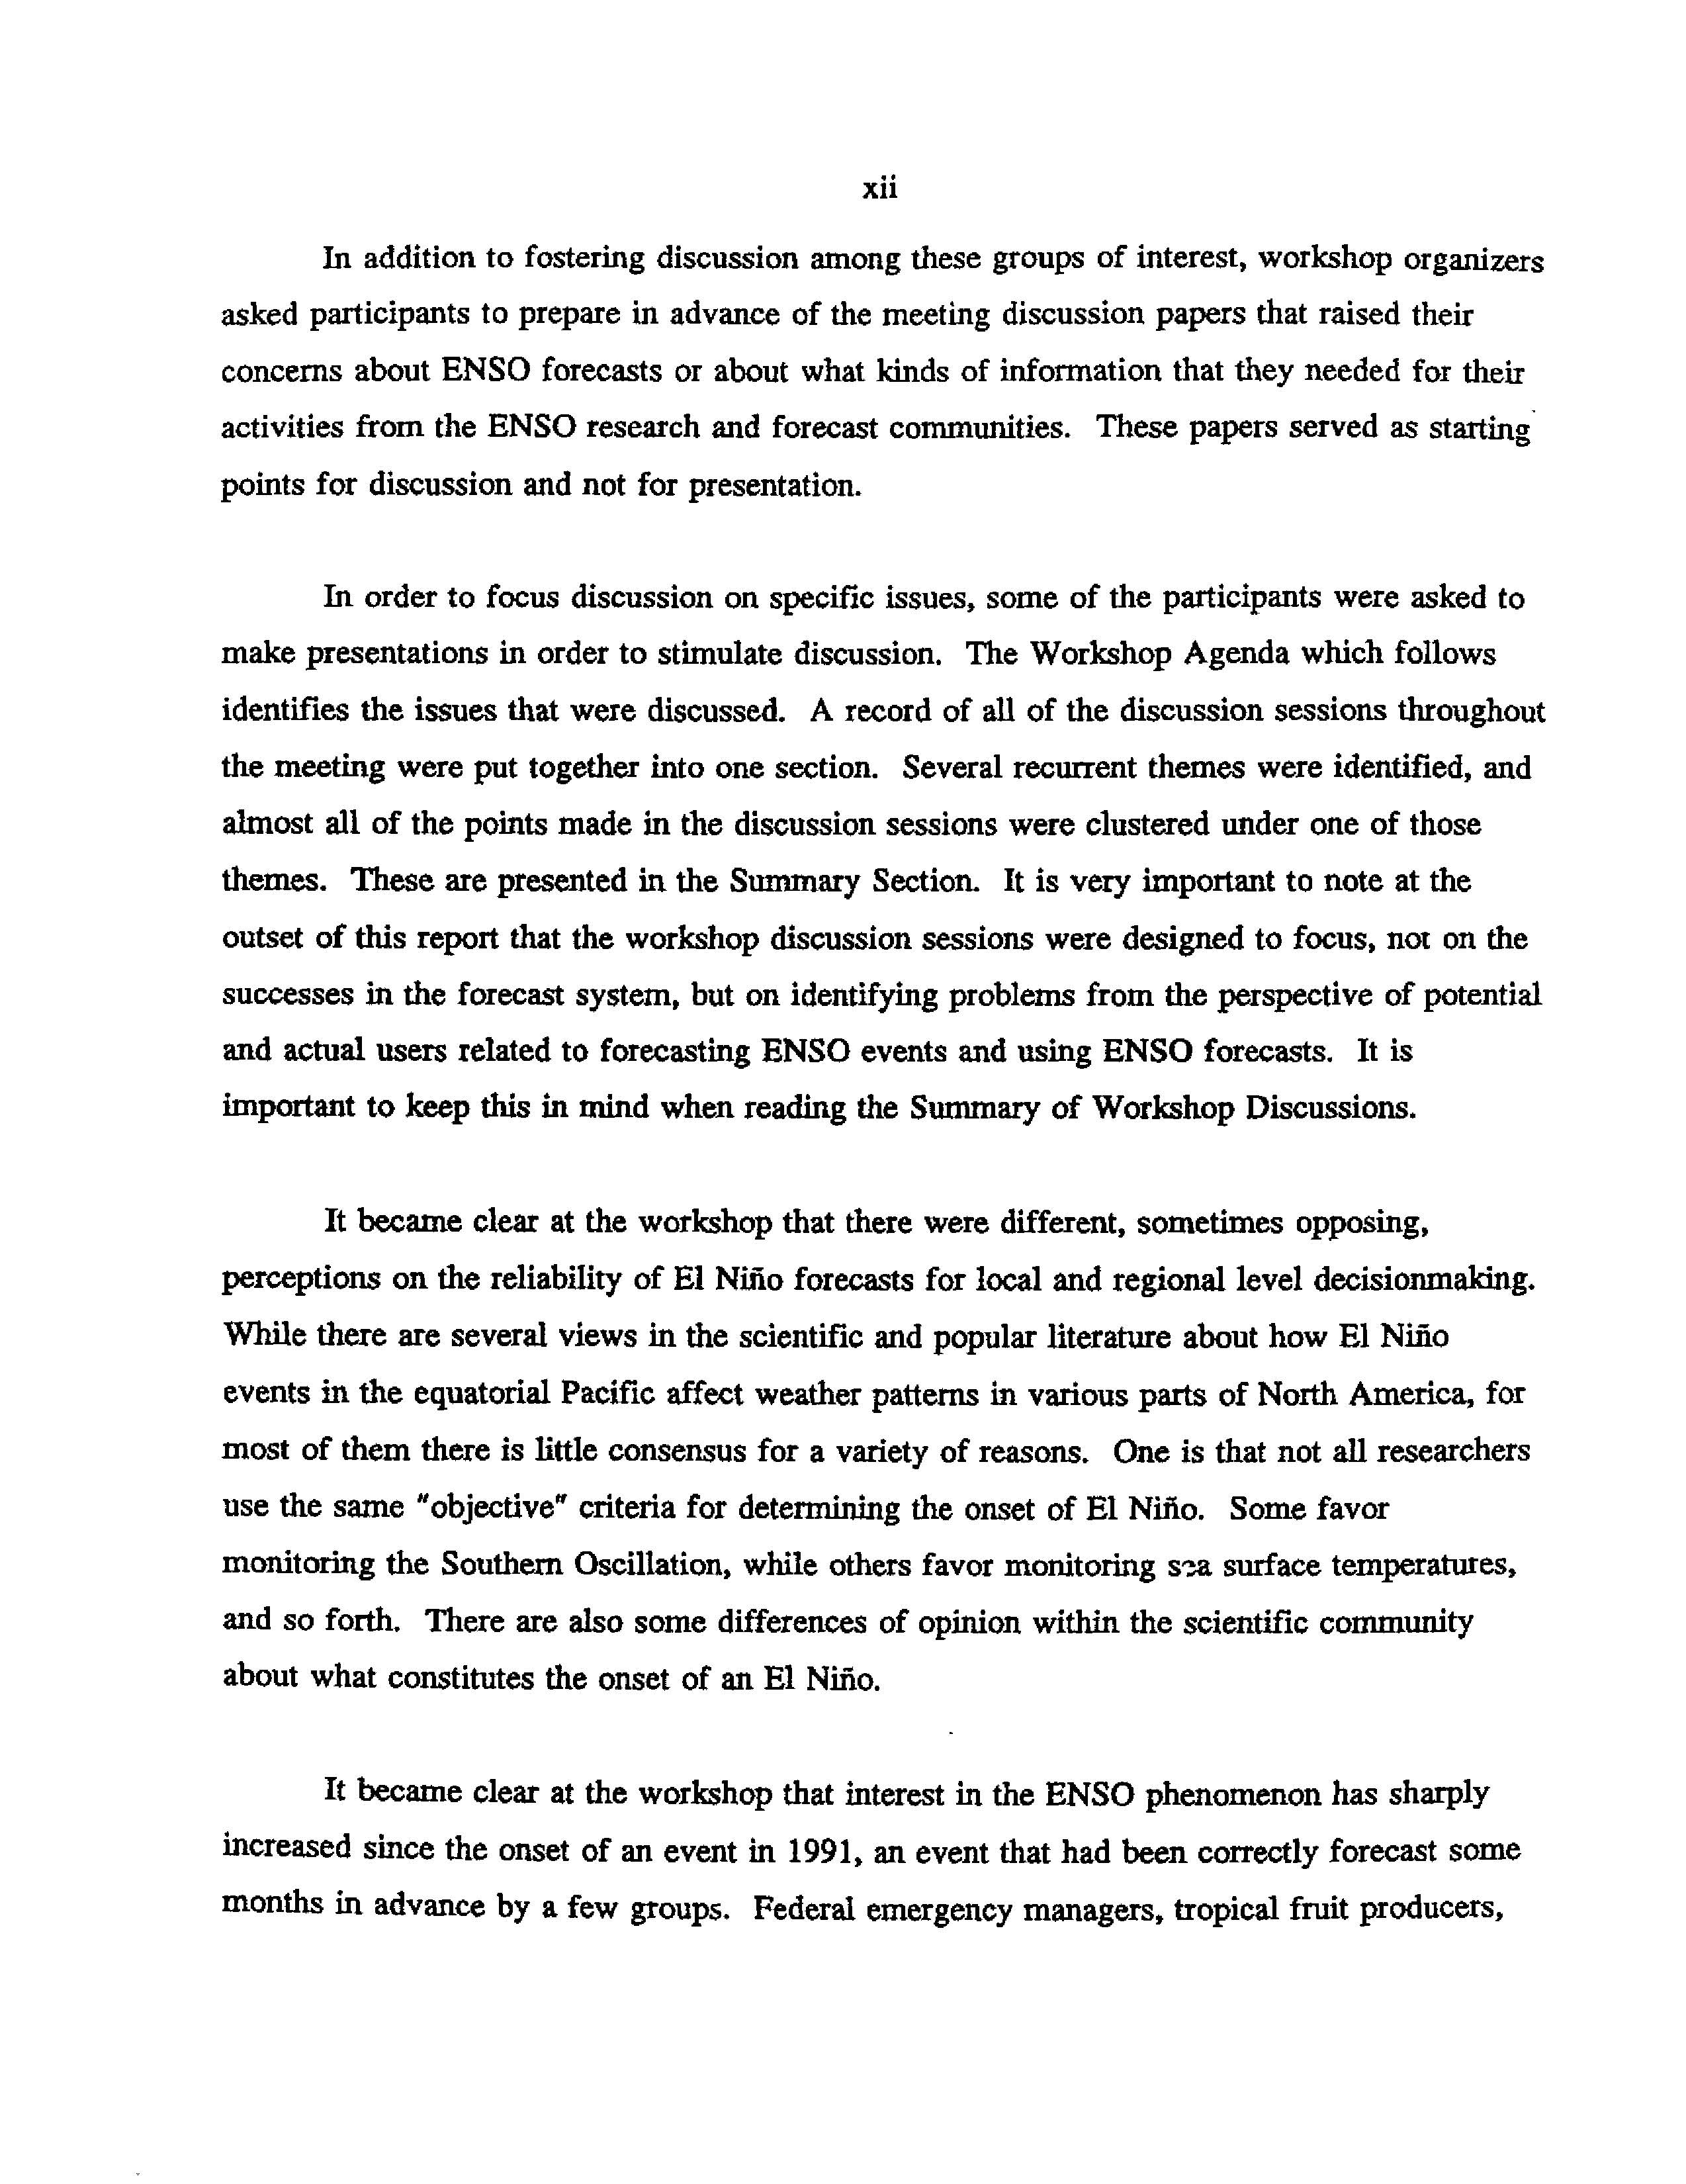 The Potential Use and Misuse of El Nino Information 1994_Page_5